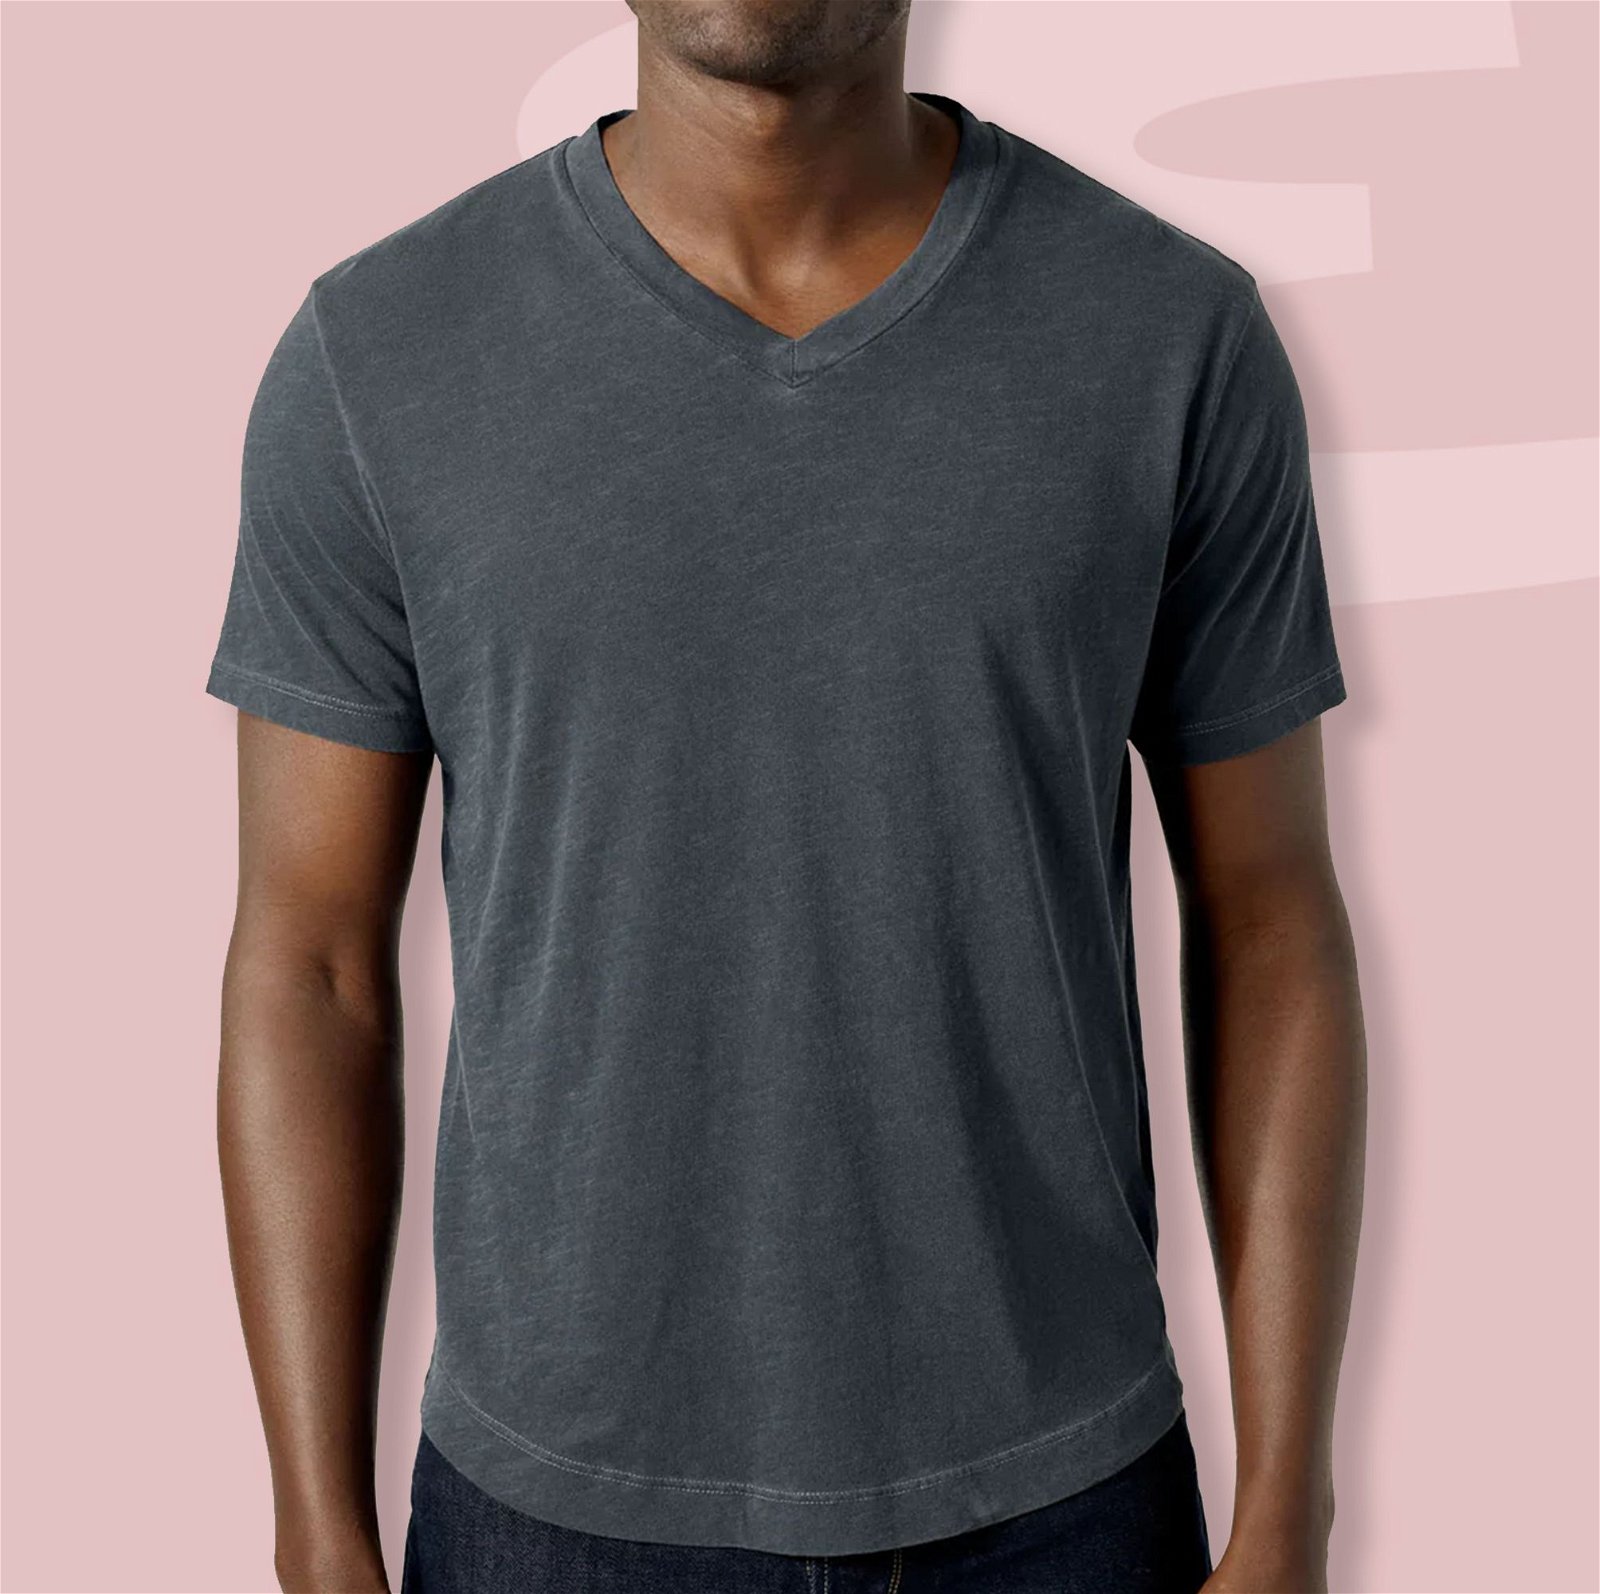 The 30 Best V-Neck T-shirts to Wear on Their Own (or Under a Button-up)